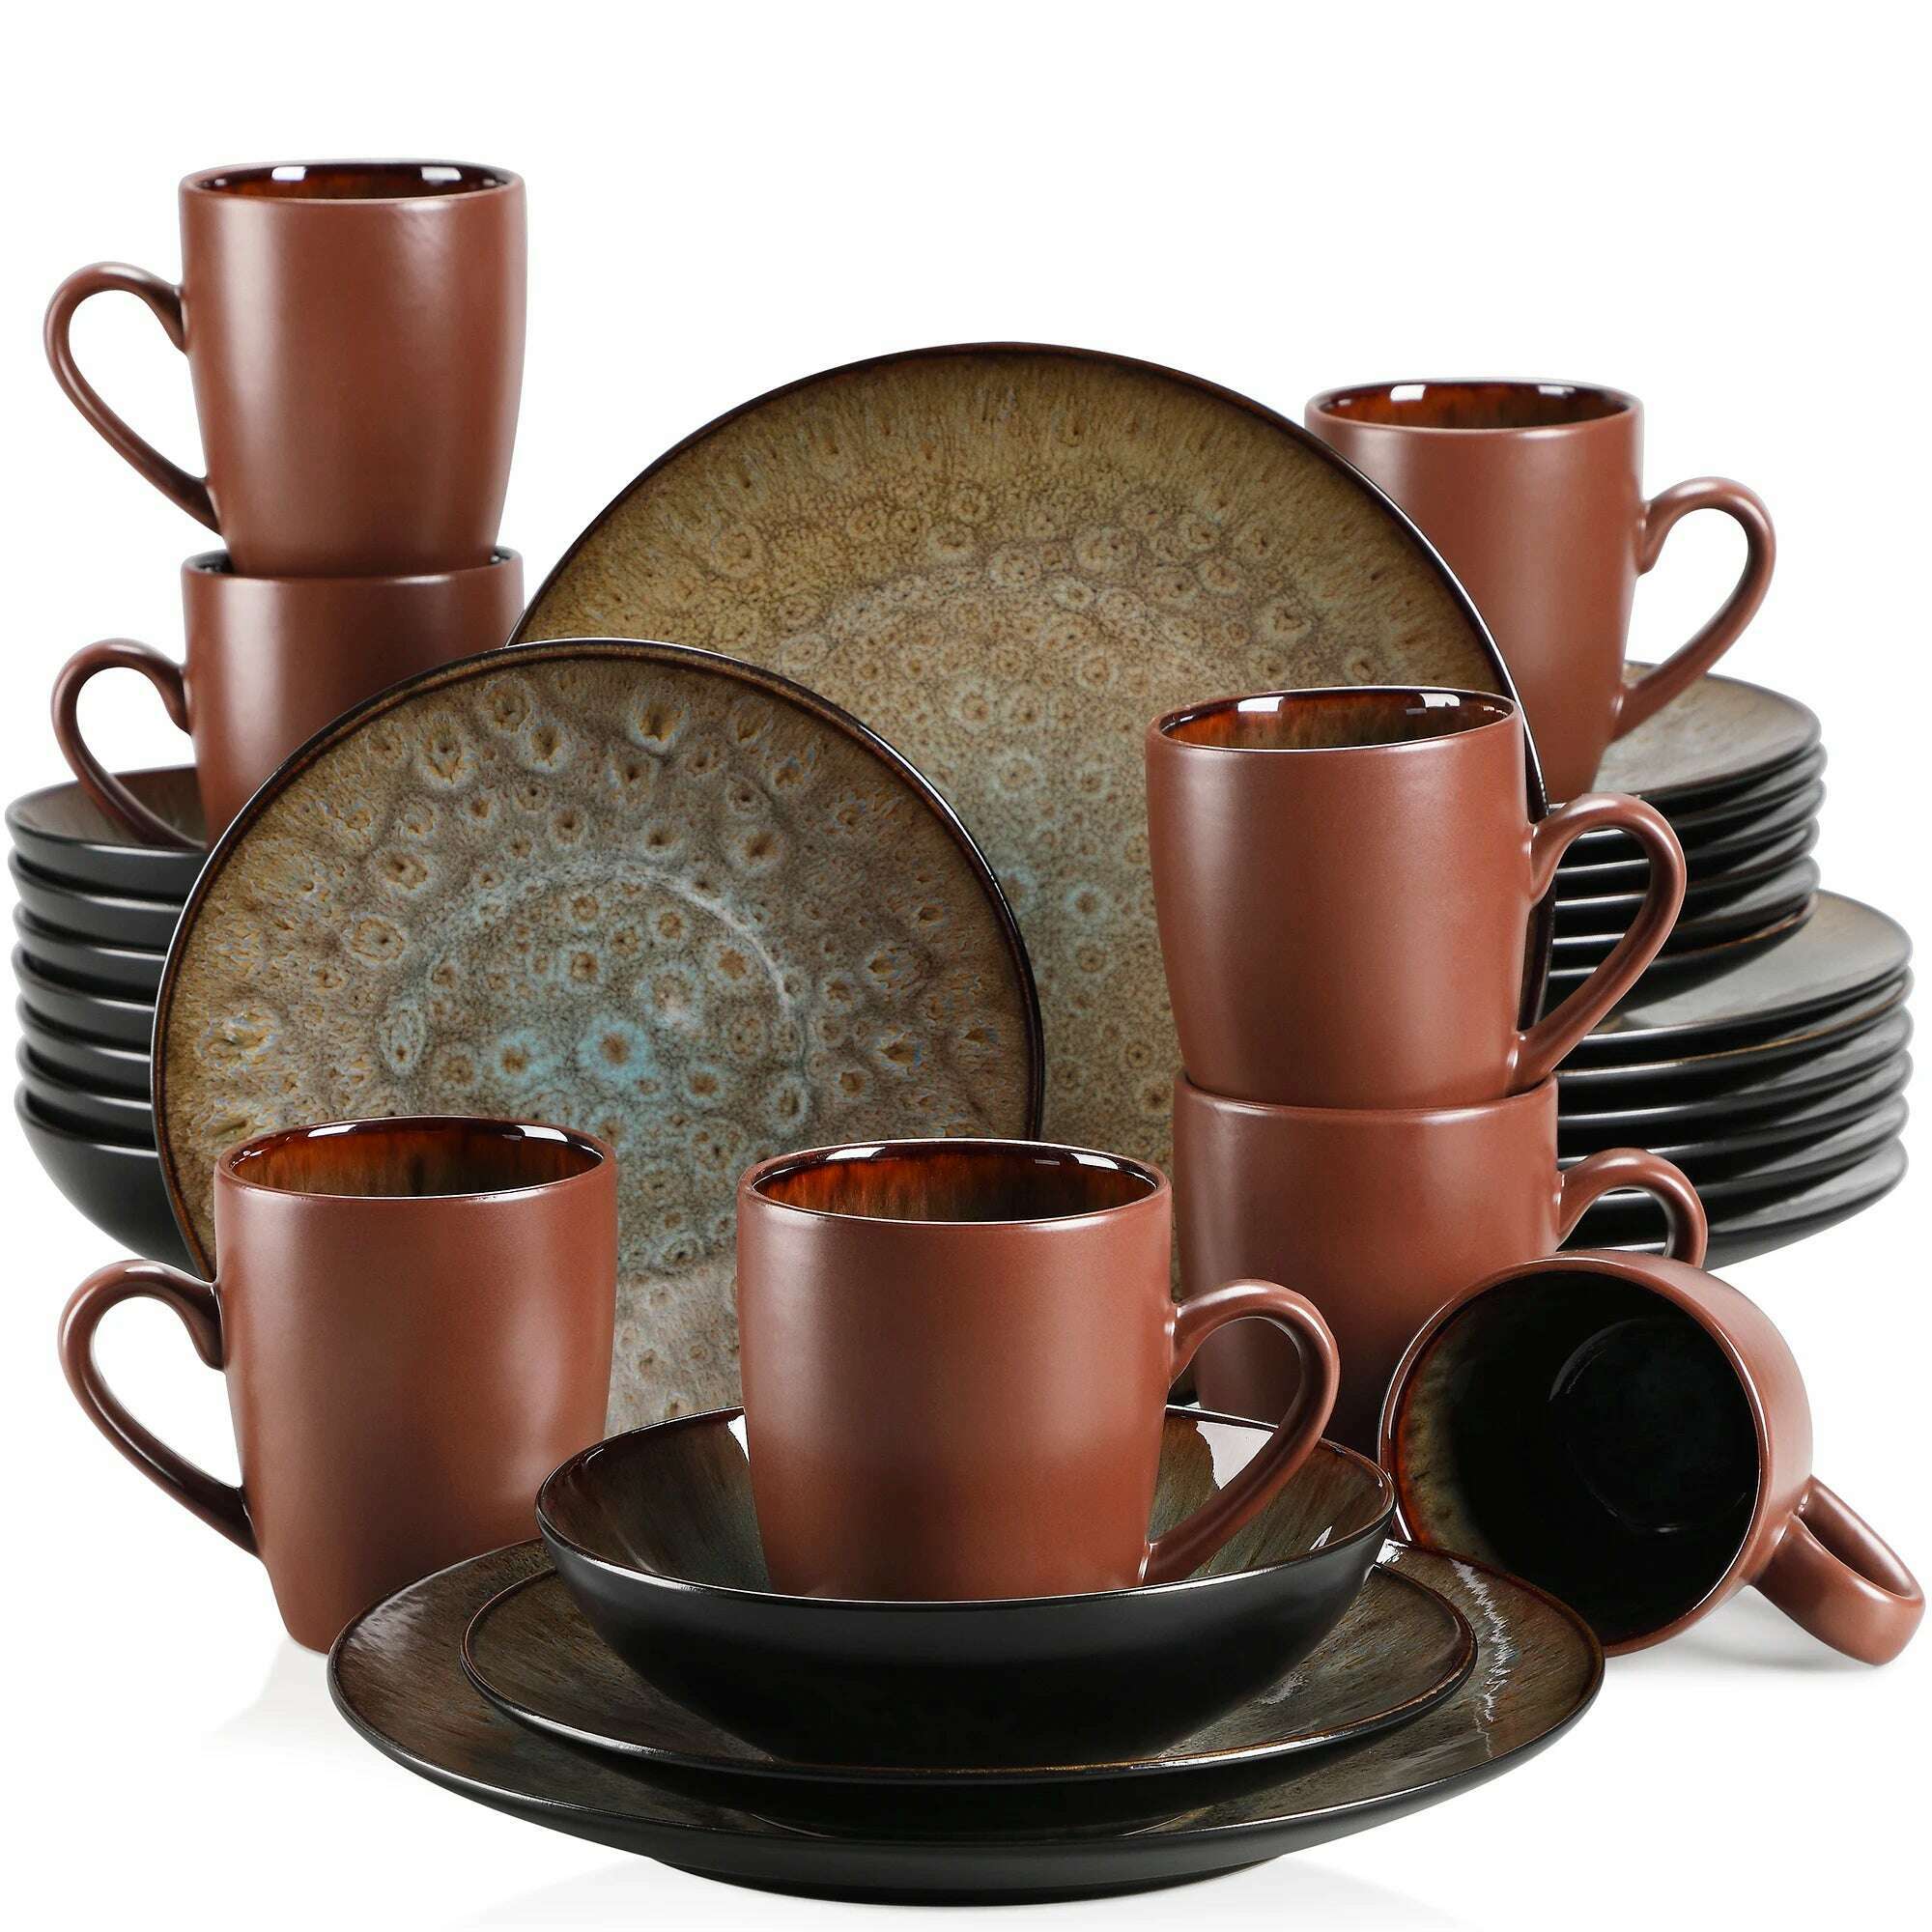 KIMLUD, VANCASSO BUBBLE 16/32/48-Piece Tableware Set Vintage Ceramic Blue/Brown Stoneware Set with Dinner&Dessert Plate,Bowl,Coffee Cups, Brown-32-Piece / GERMANY, KIMLUD Womens Clothes